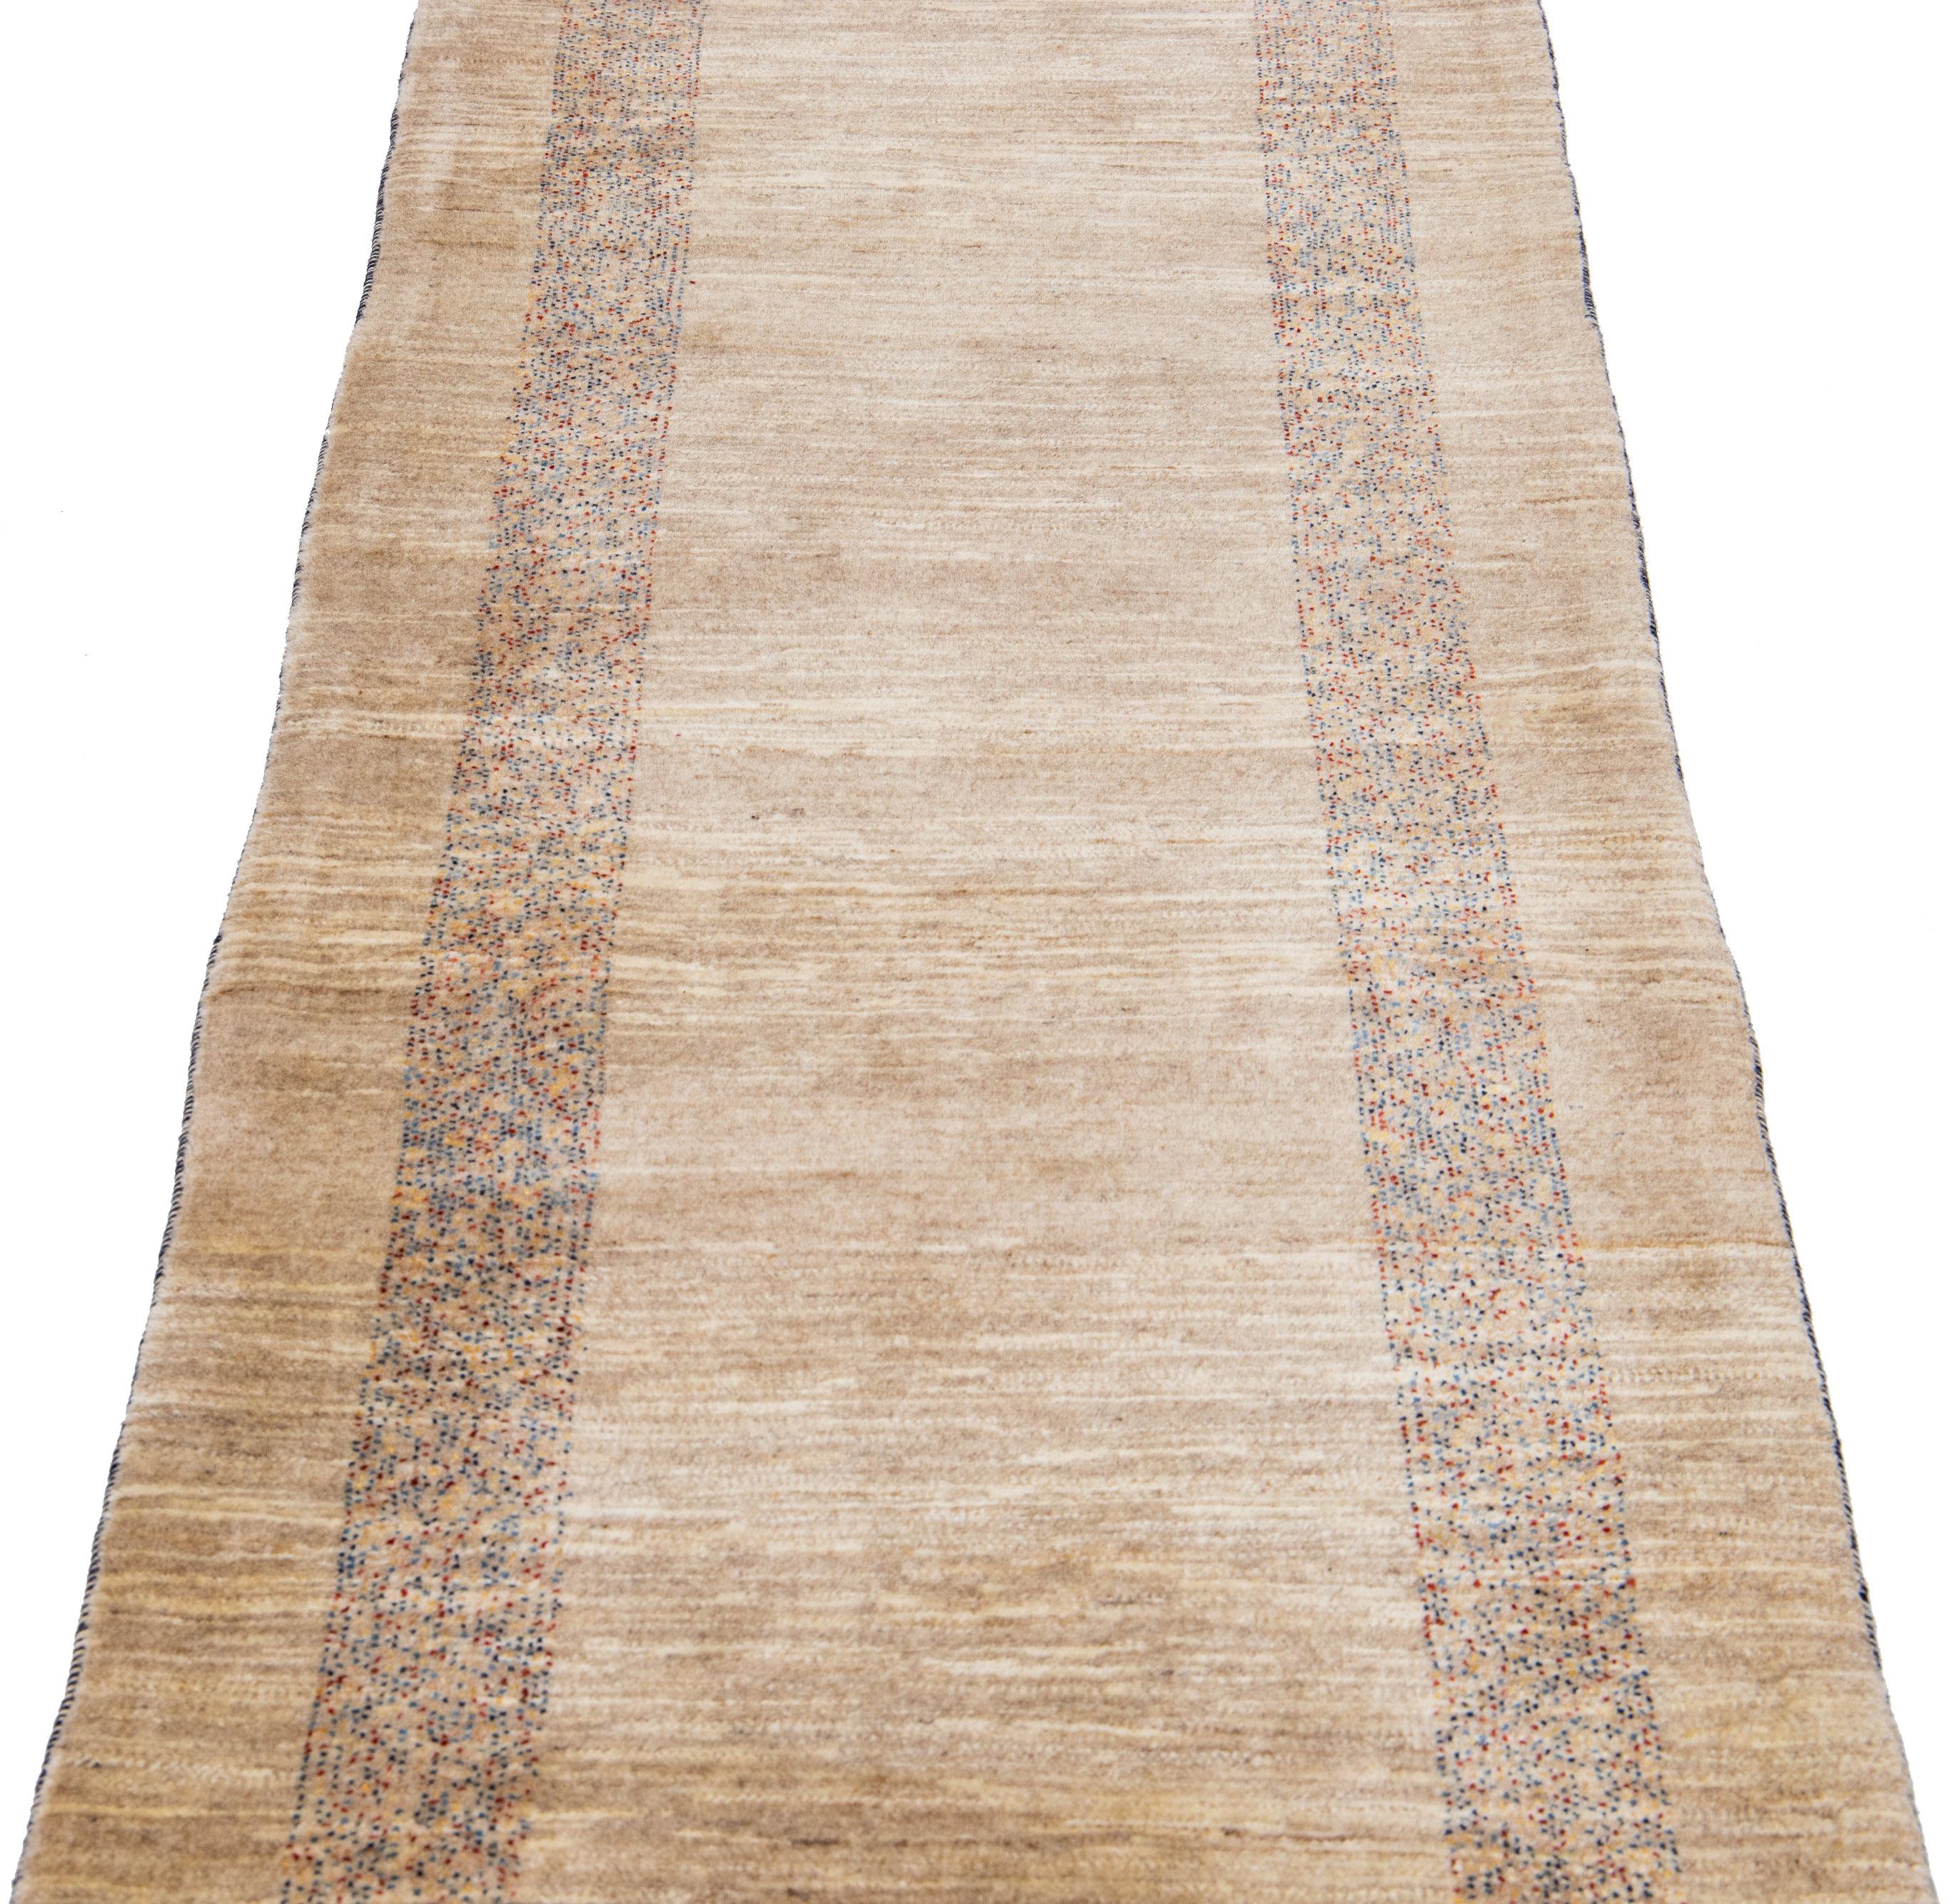 Beautiful modern Gabbeh-style hand-woven wool runner with a beige color field. This piece has blue and red accents in a gorgeous geometric design.

This rug measures: 2'8